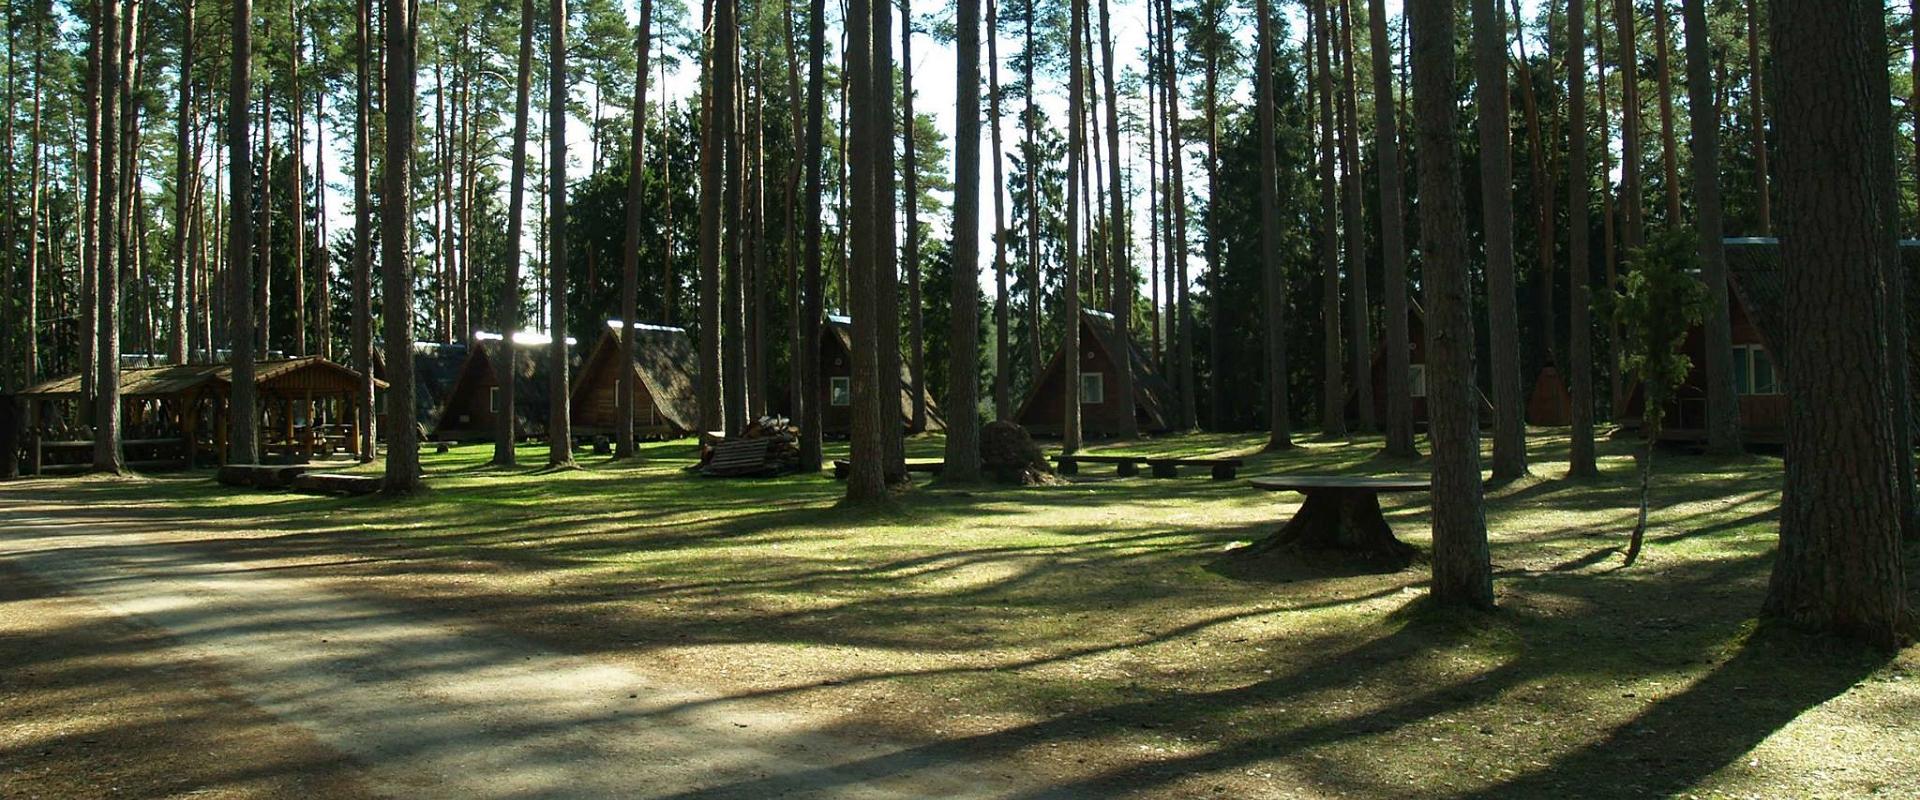 Tartu County Recreational Sports Centre is a holiday complex located 2 km from the city of Elva, in a beautiful natural pine forest. Here, you can pla